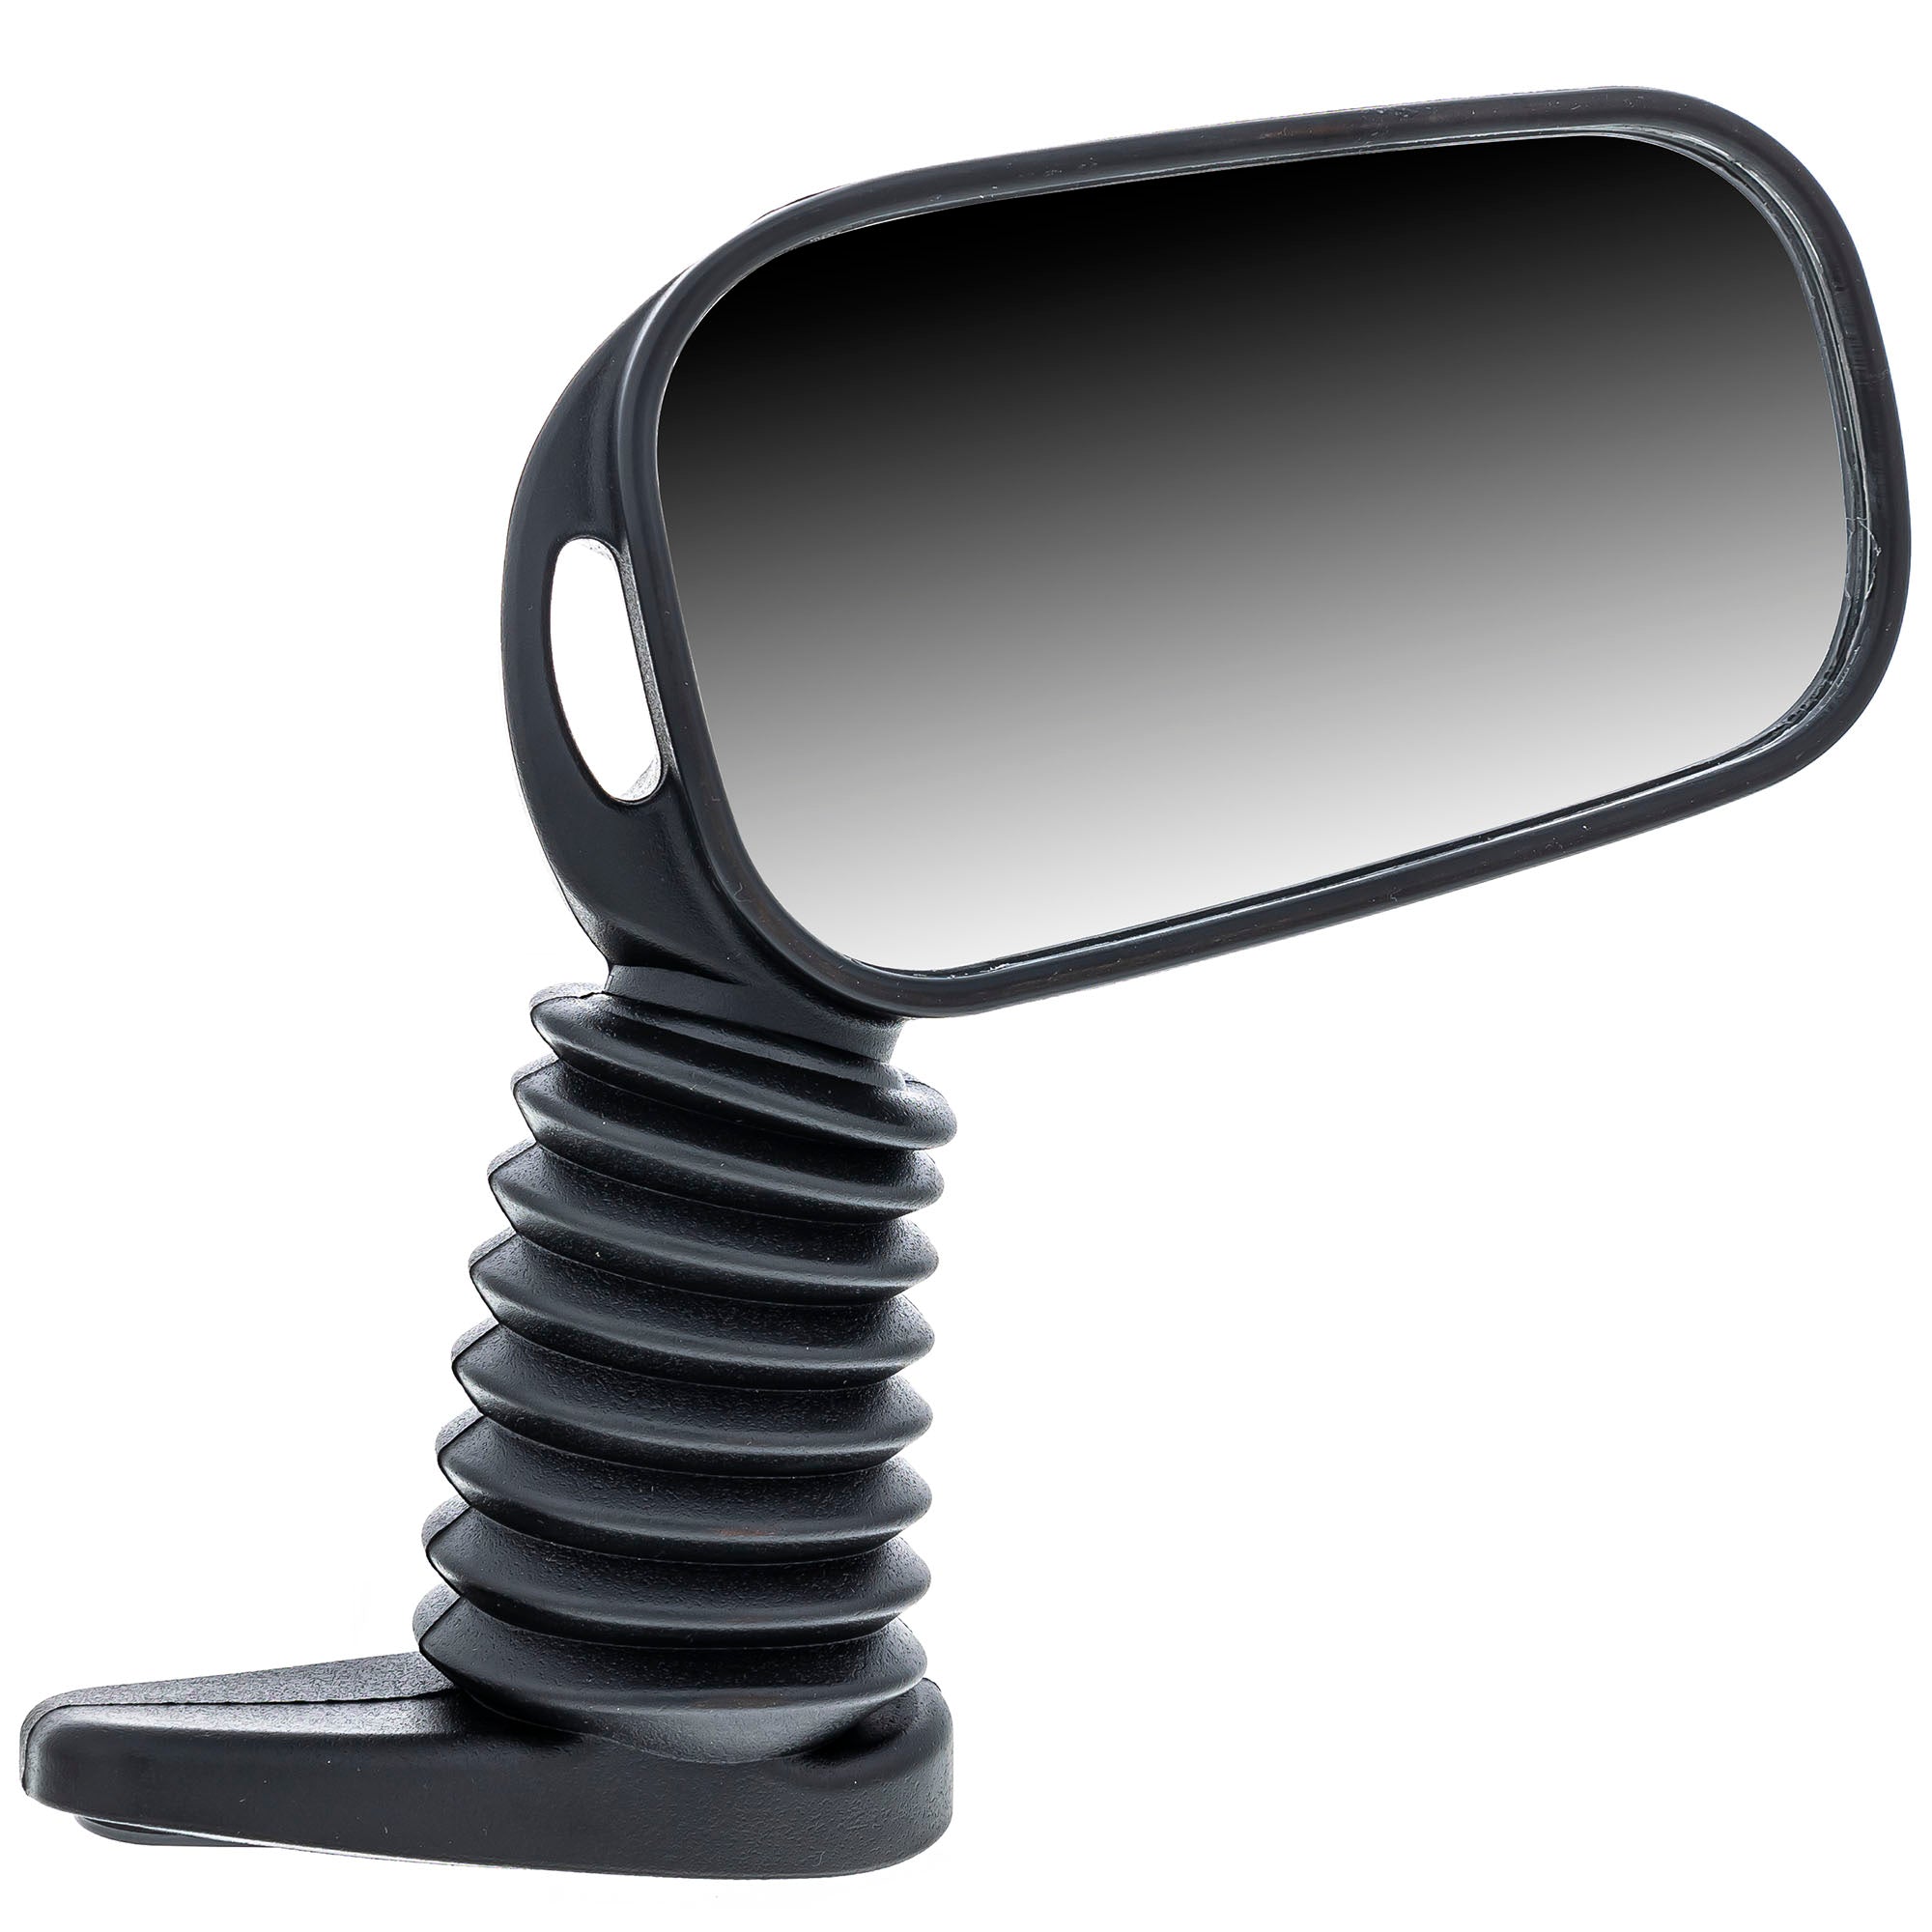 Kimpex 283989 Deluxe Mirror with Protector Bolt-on